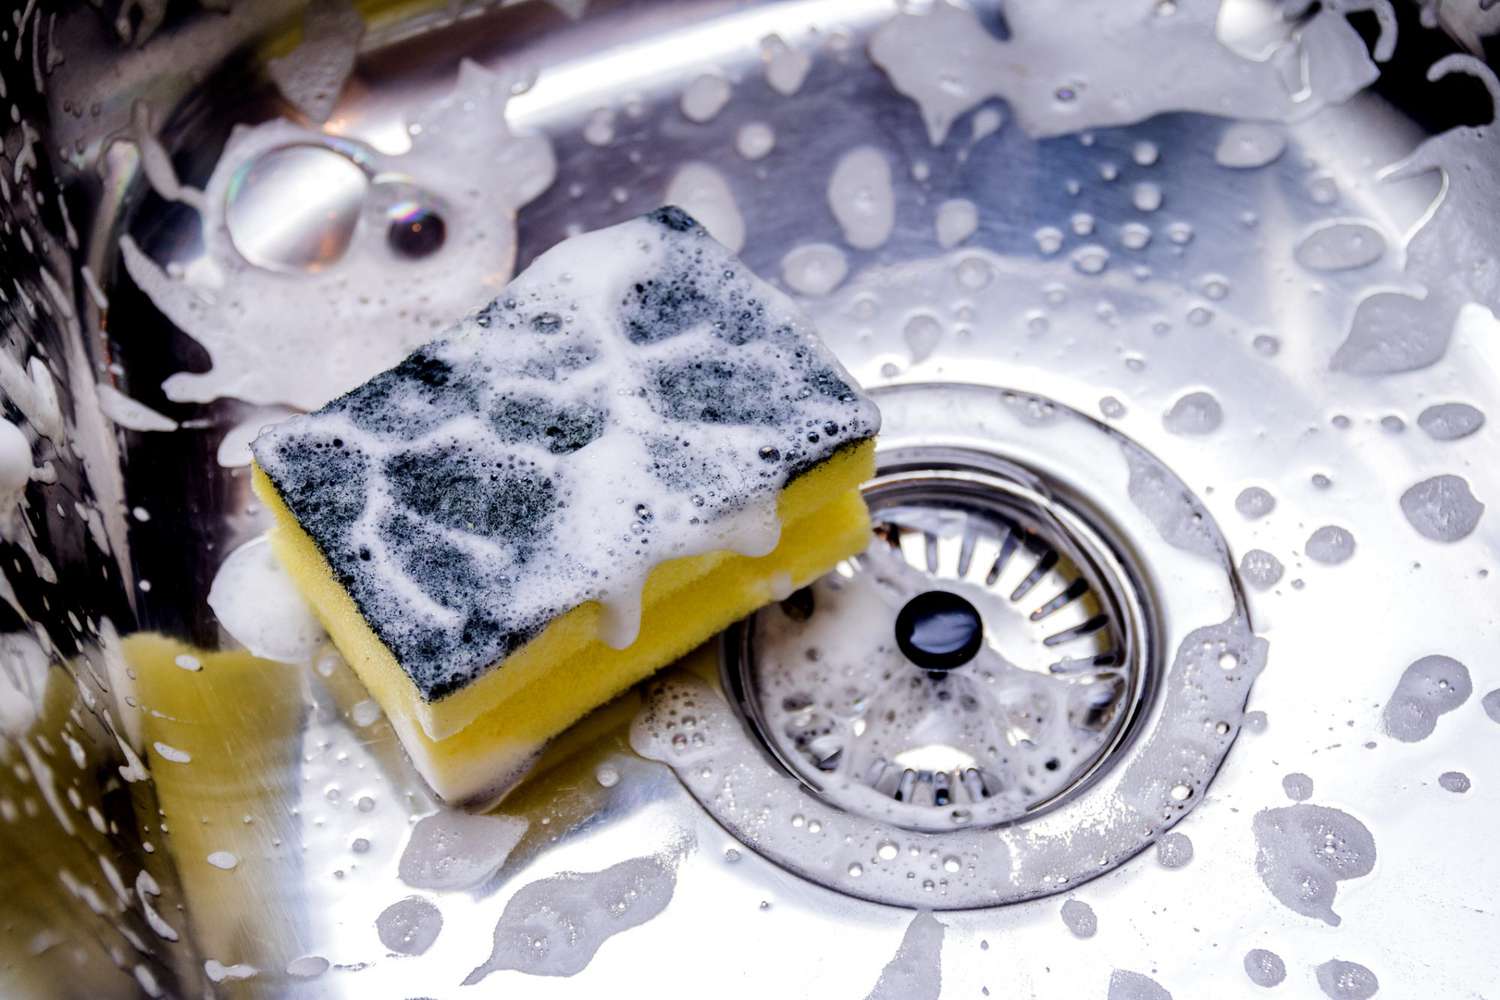 How to Clean a Kitchen Sponge | Allrecipes